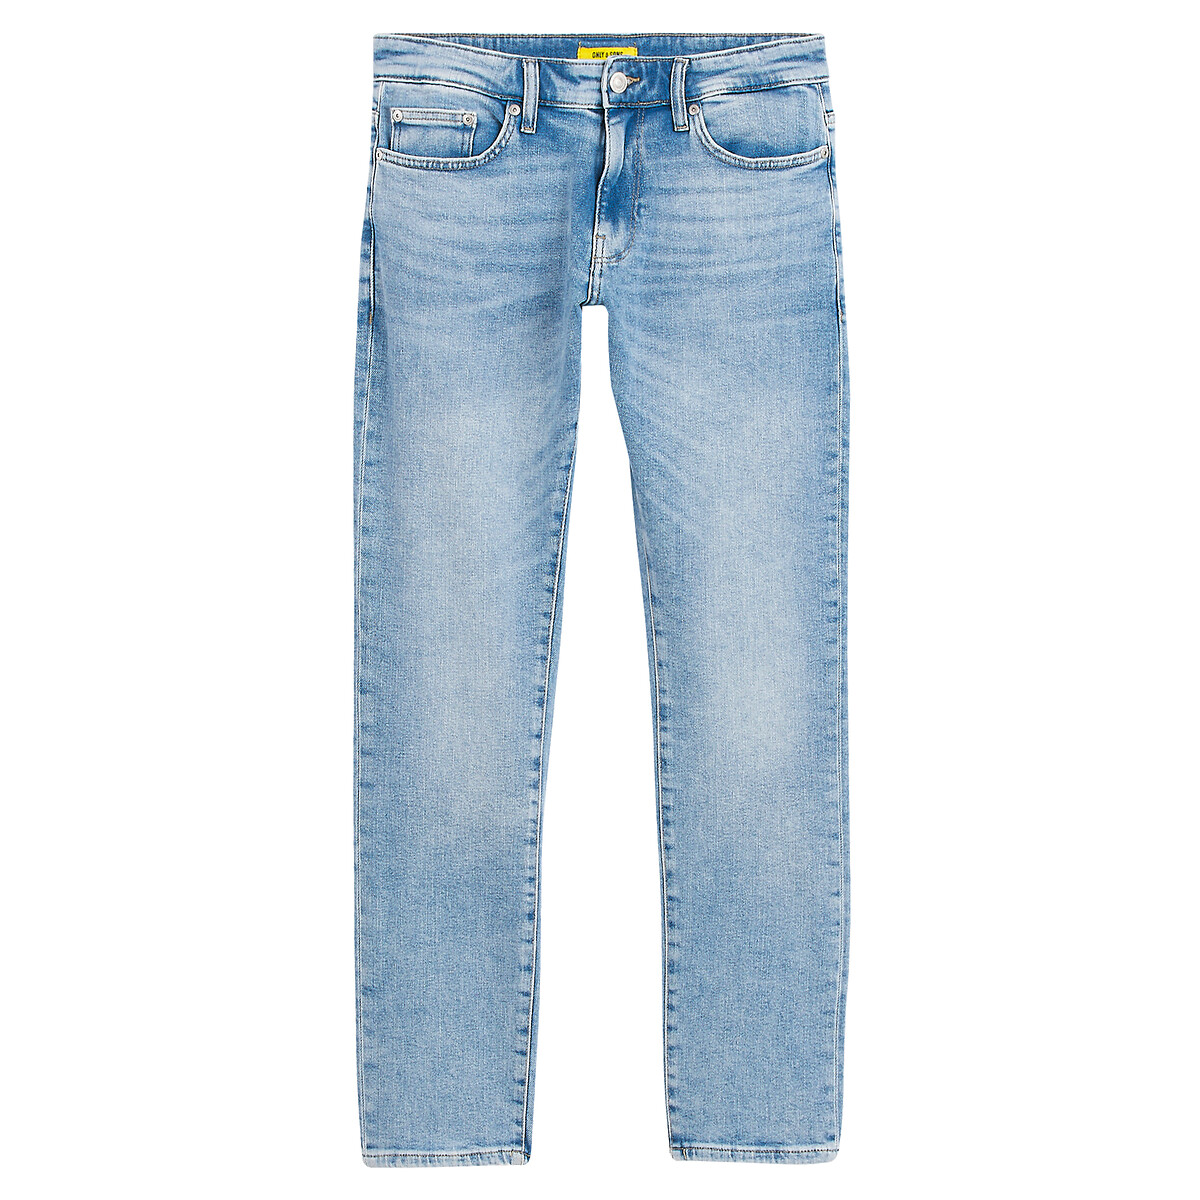 Weft Straight Stretch Jeans in Mid Rise